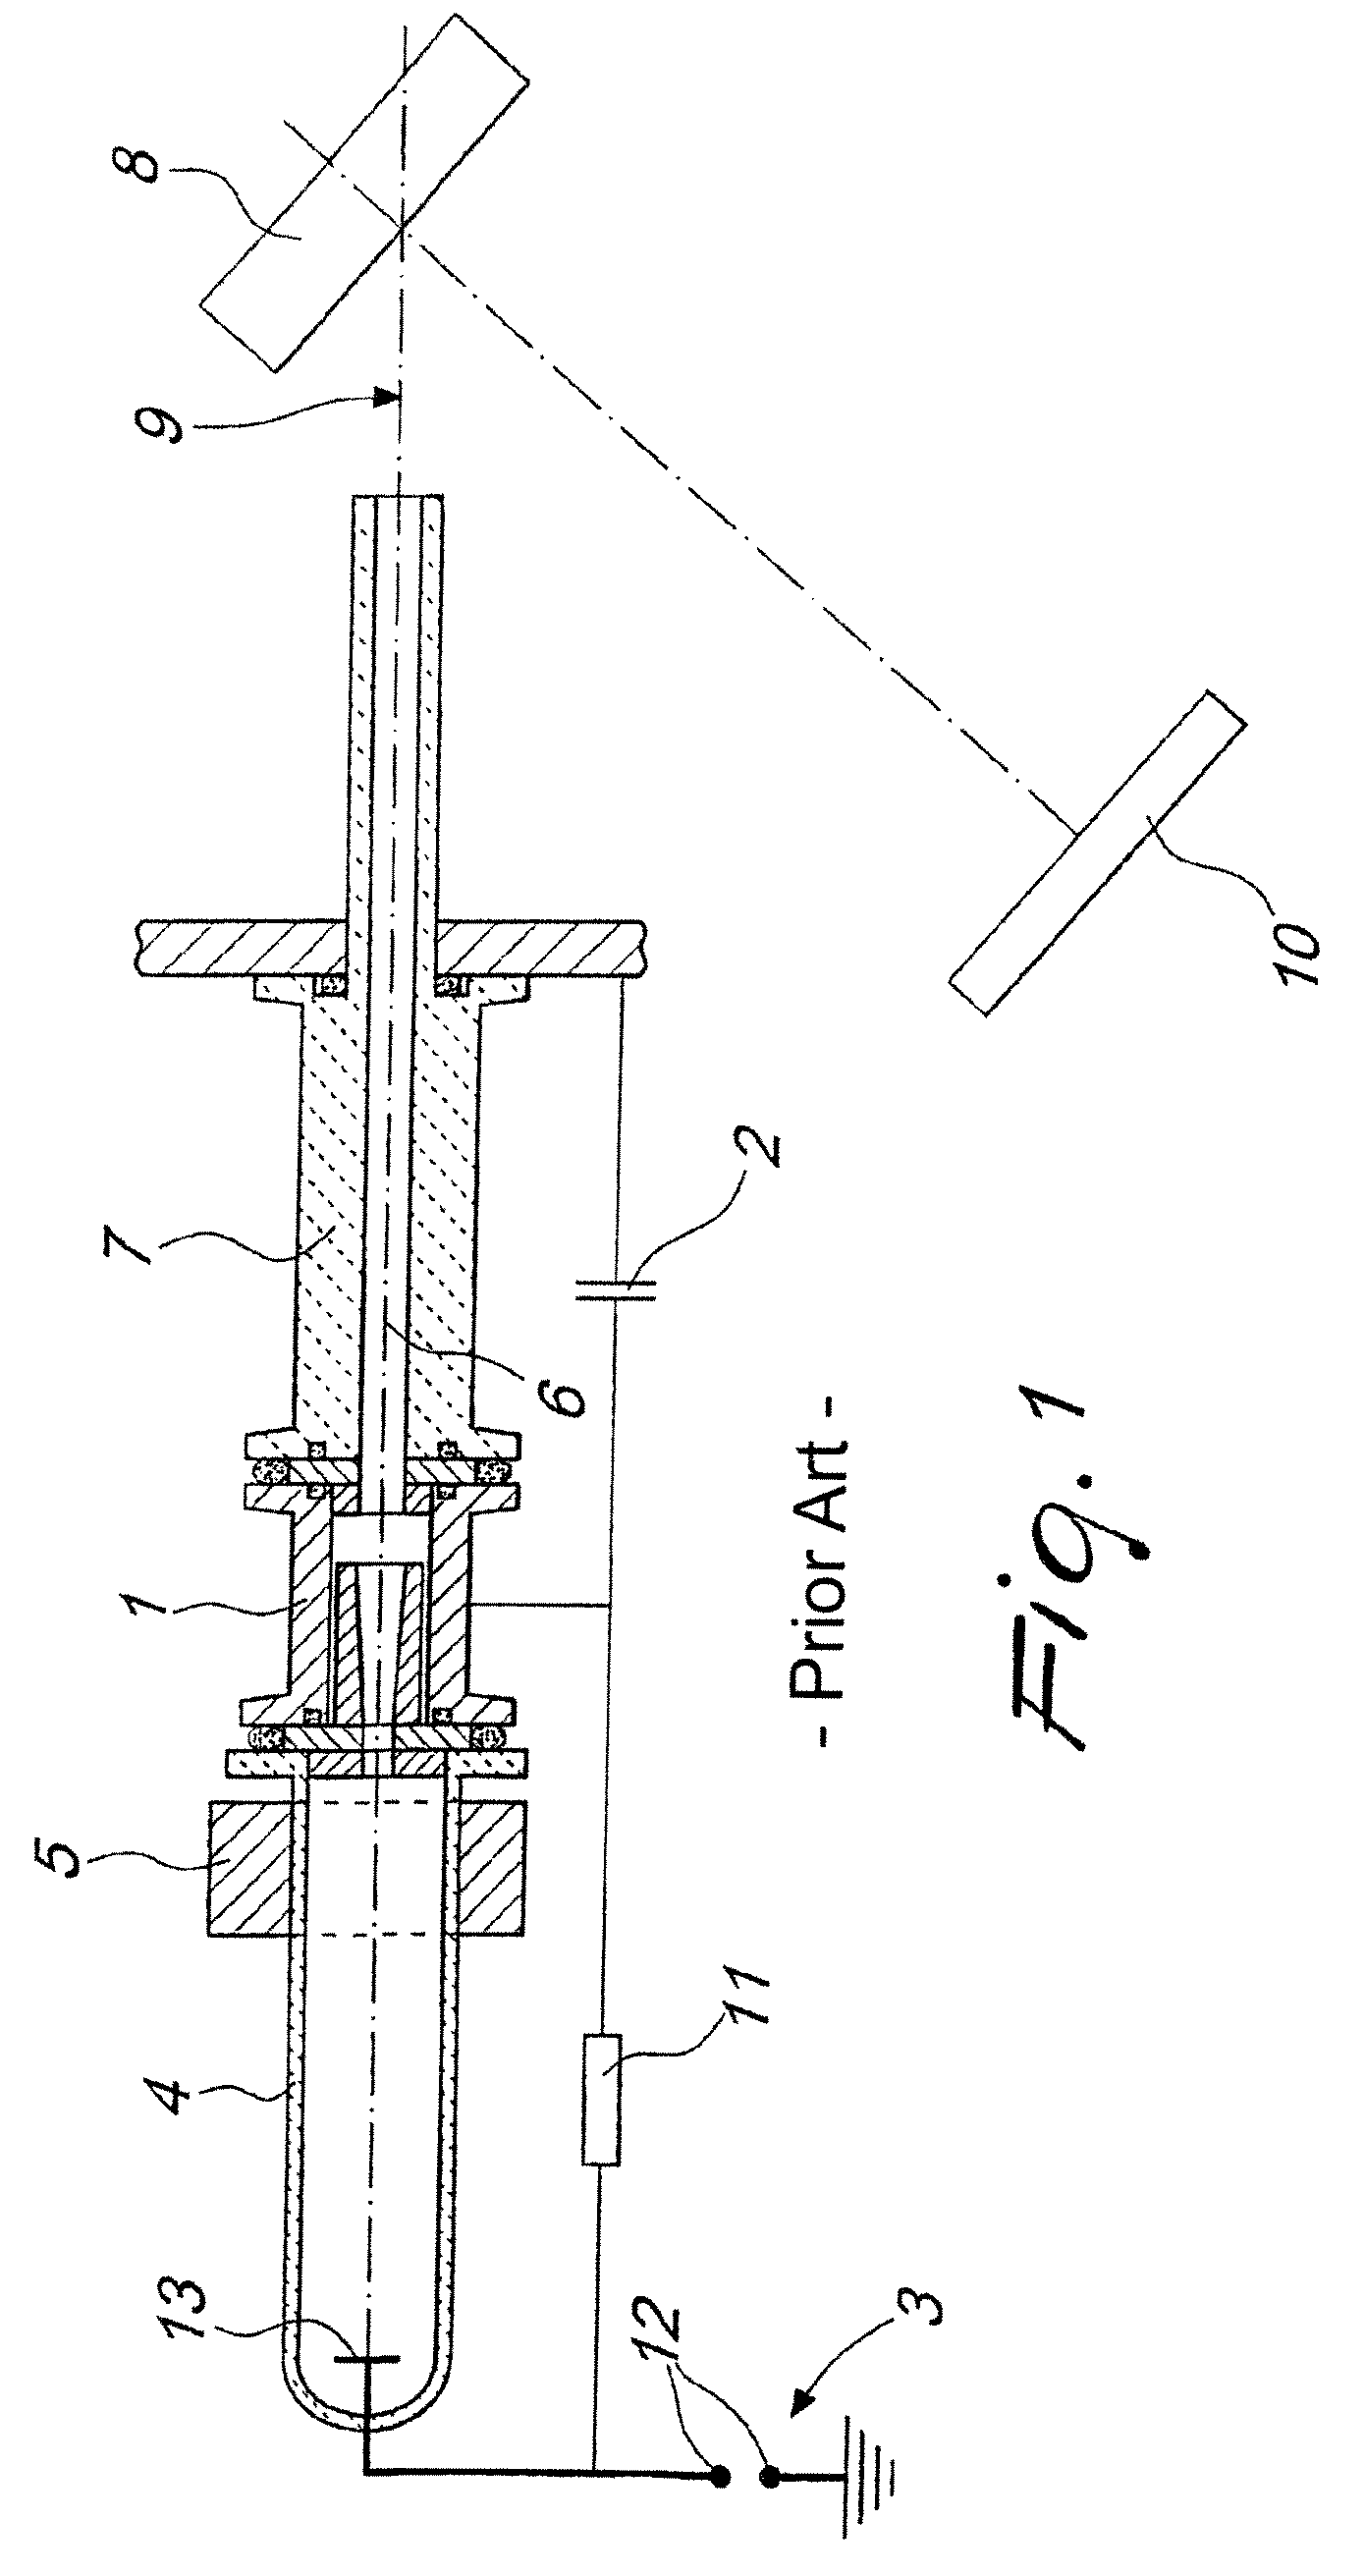 Apparatus and process for generating, accelerating and propagating beams of electrons and plasma